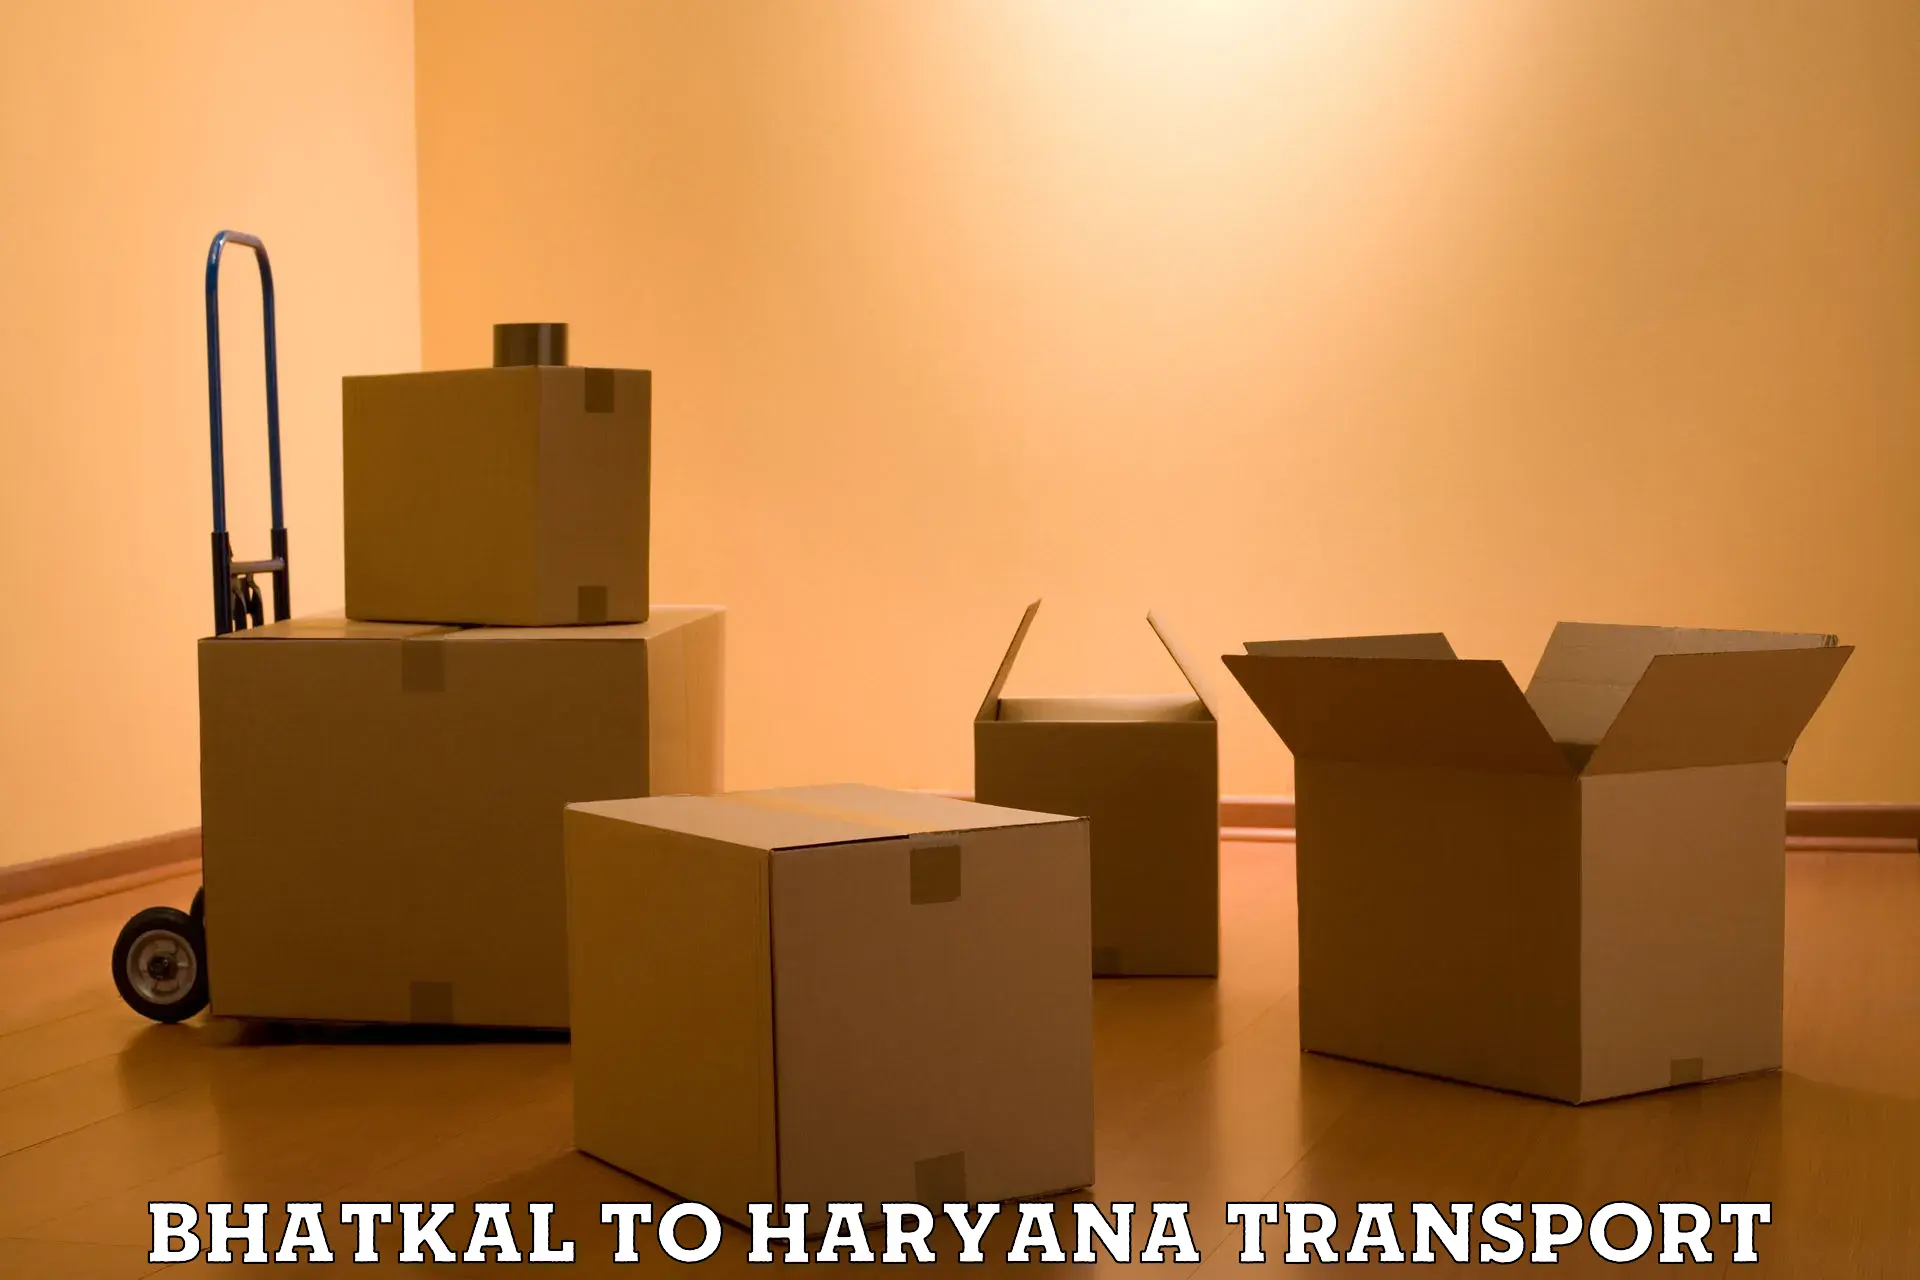 Container transport service Bhatkal to Chirya